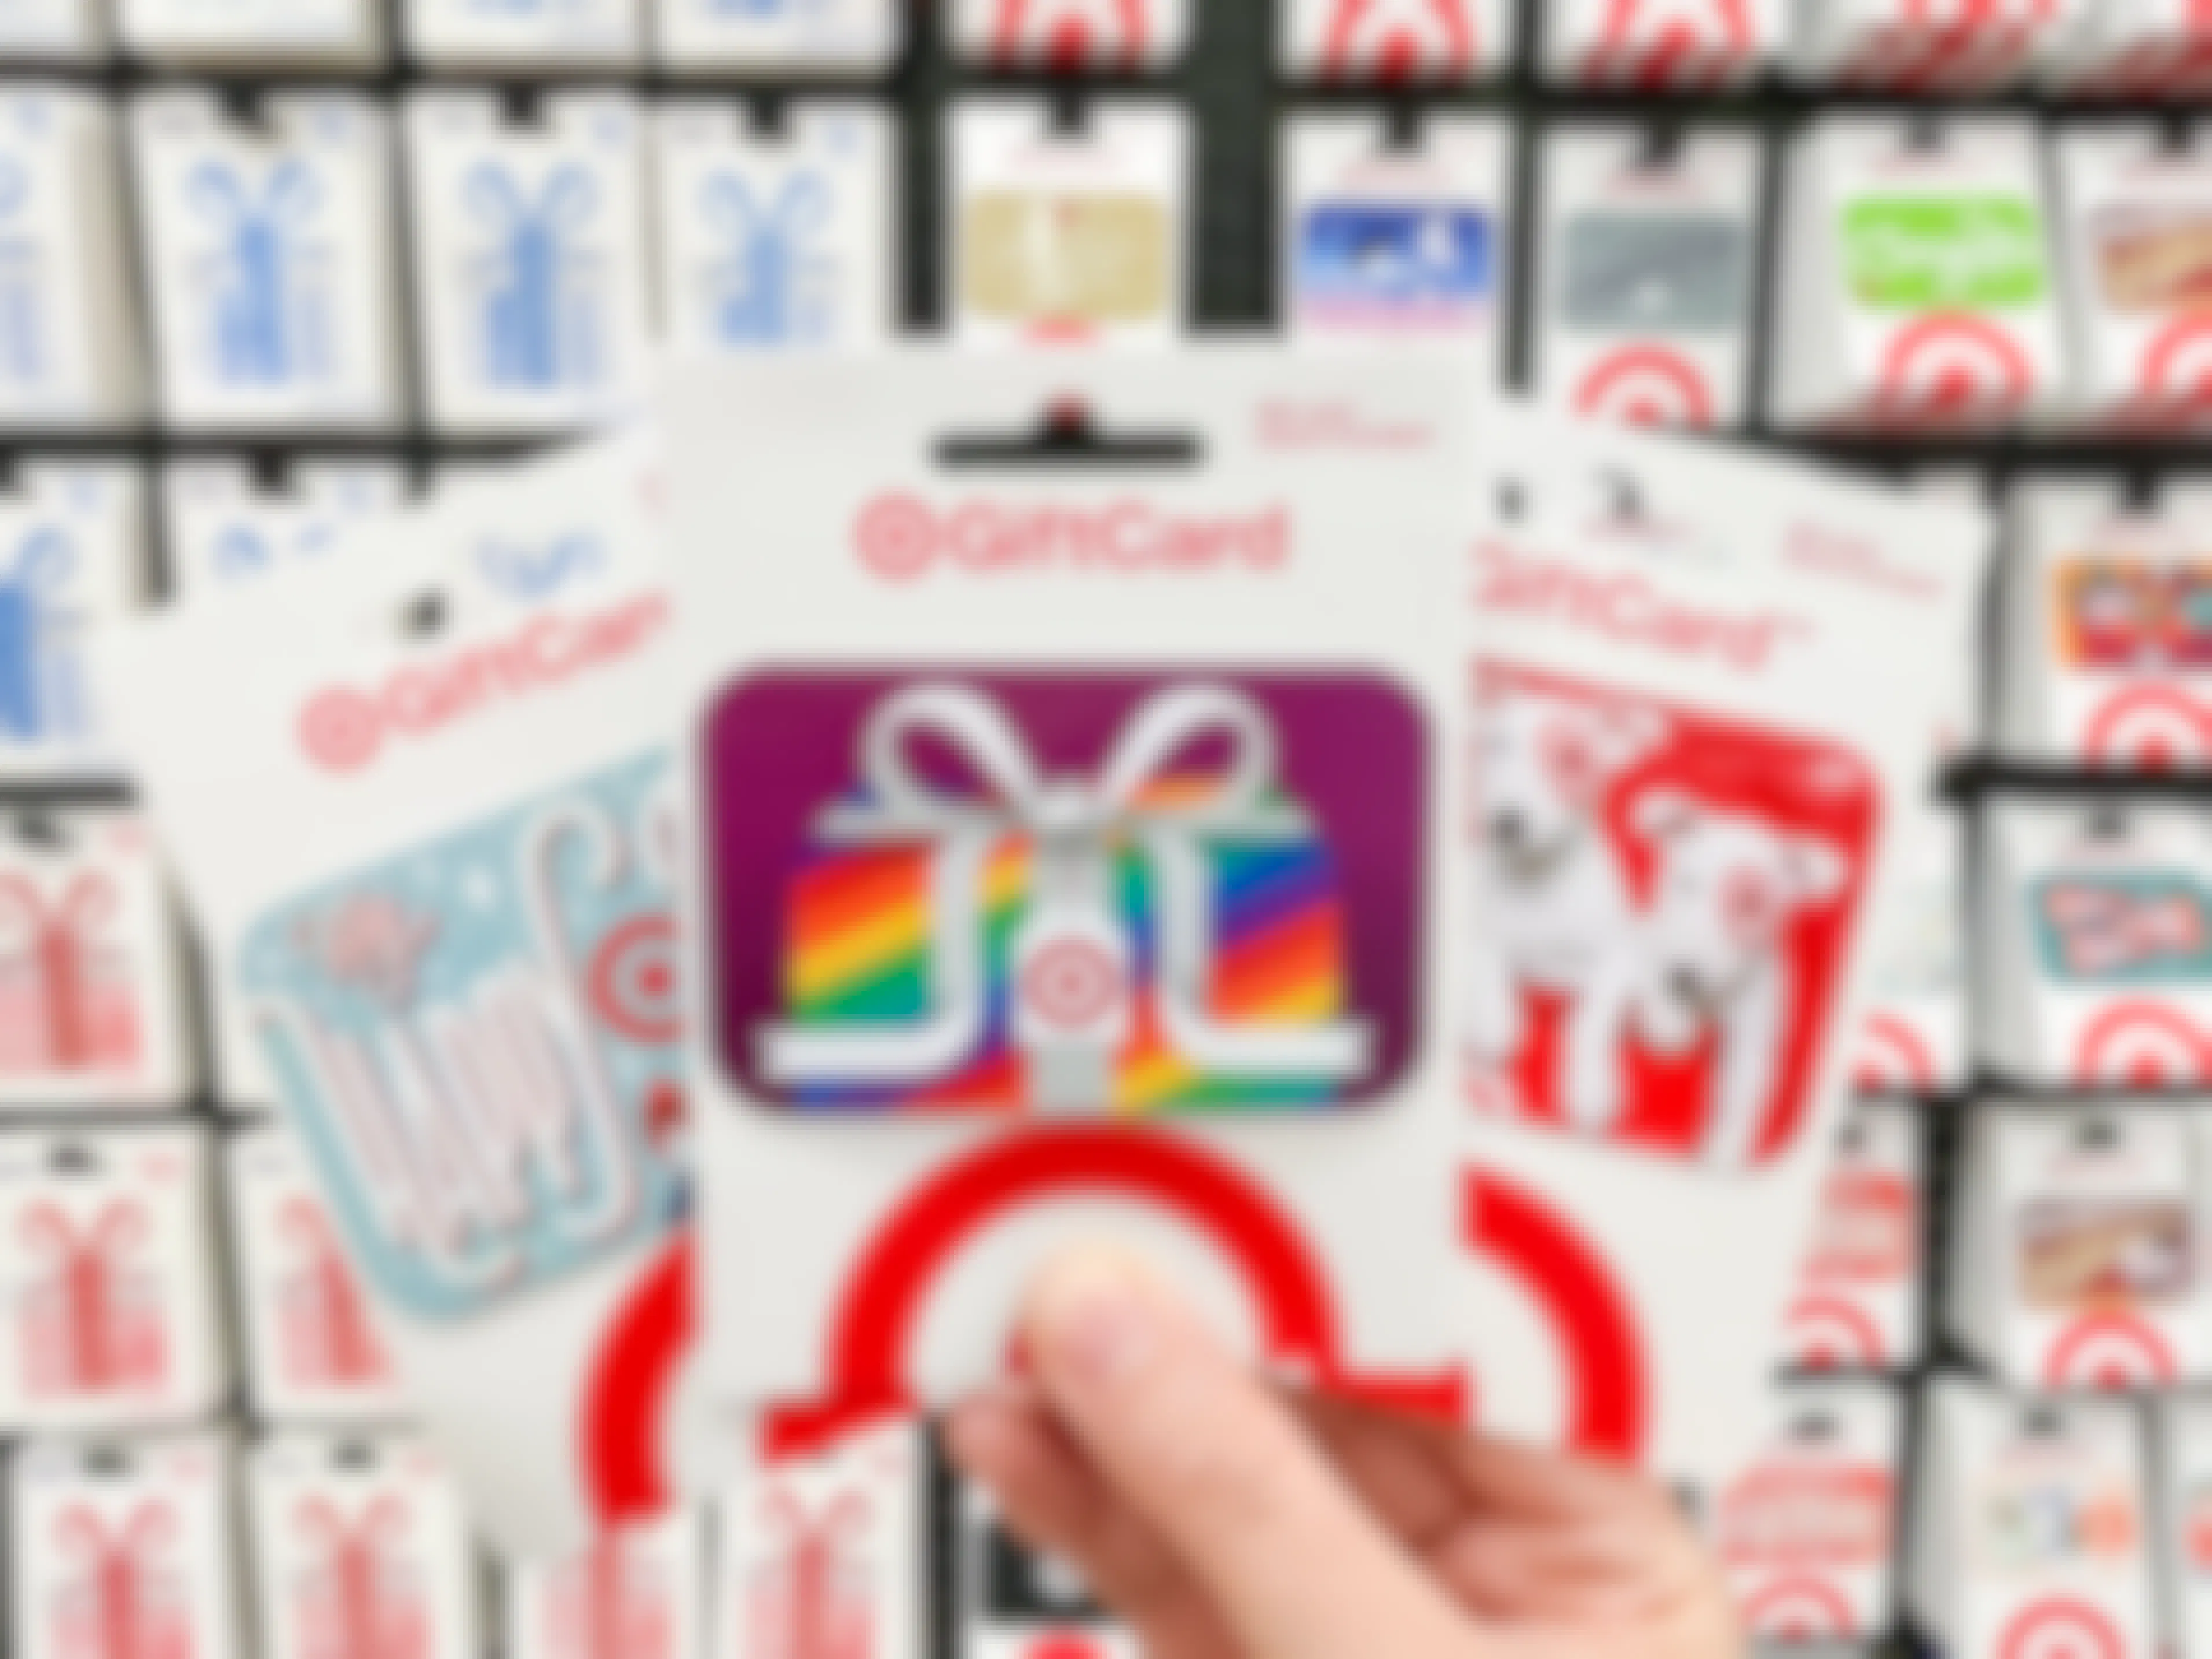 Three Target gift cards held in a person's hand in front of the wall of gift cards at Target.